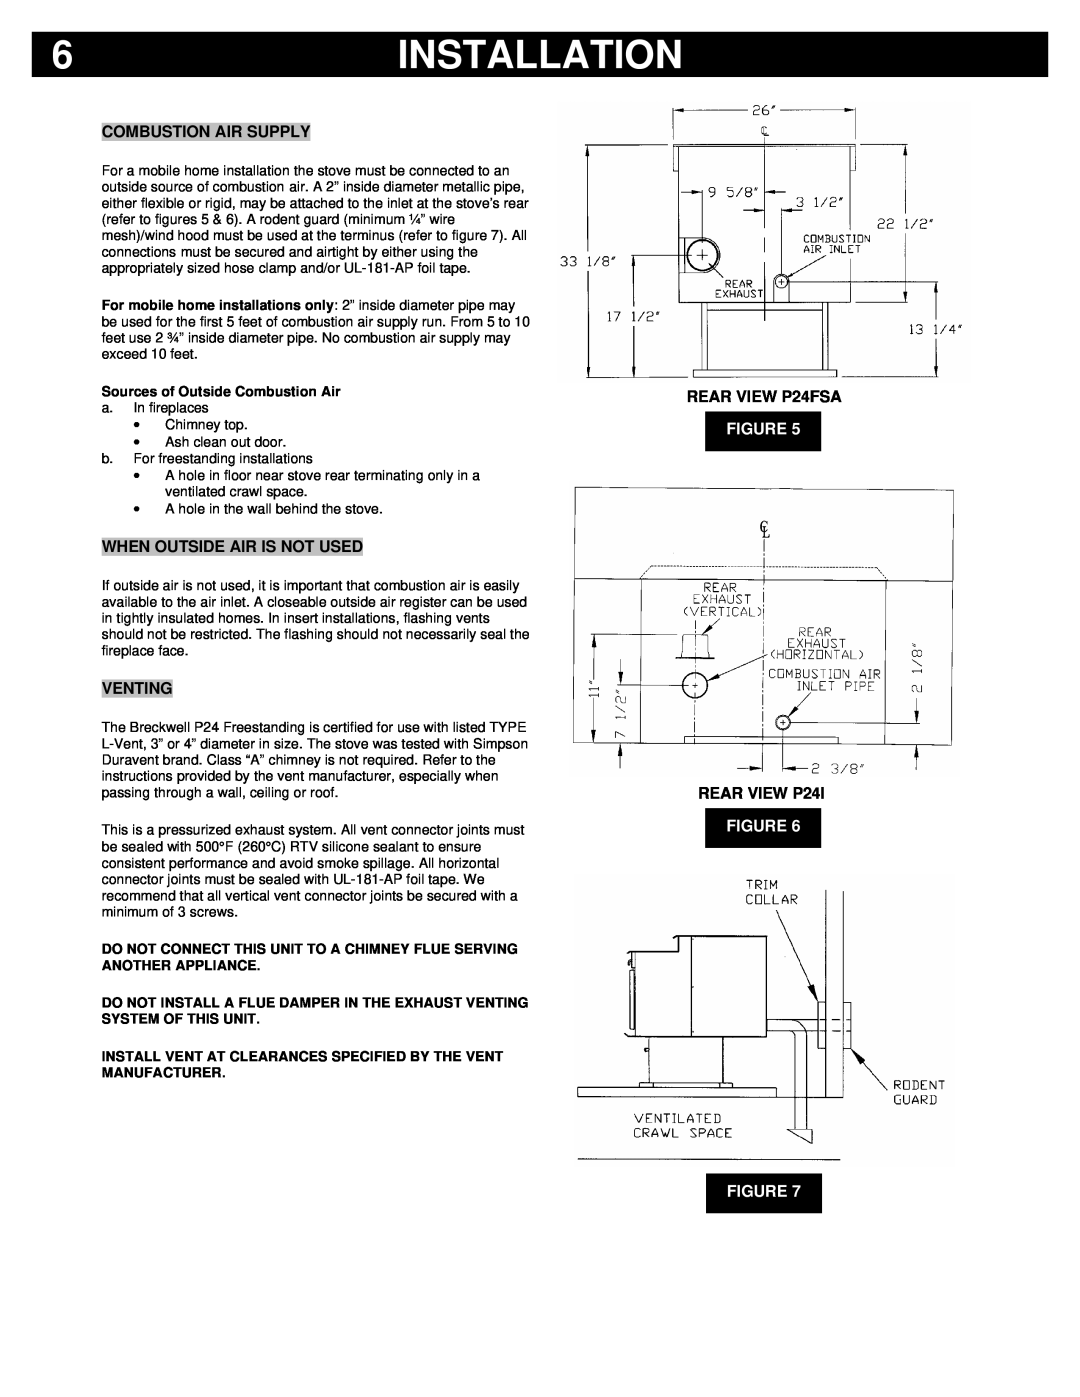 Breckwell P24I Installation, Combustion Air Supply, When Outside Air Is Not Used, Venting, REAR VIEW P24FSA, Figure Figure 